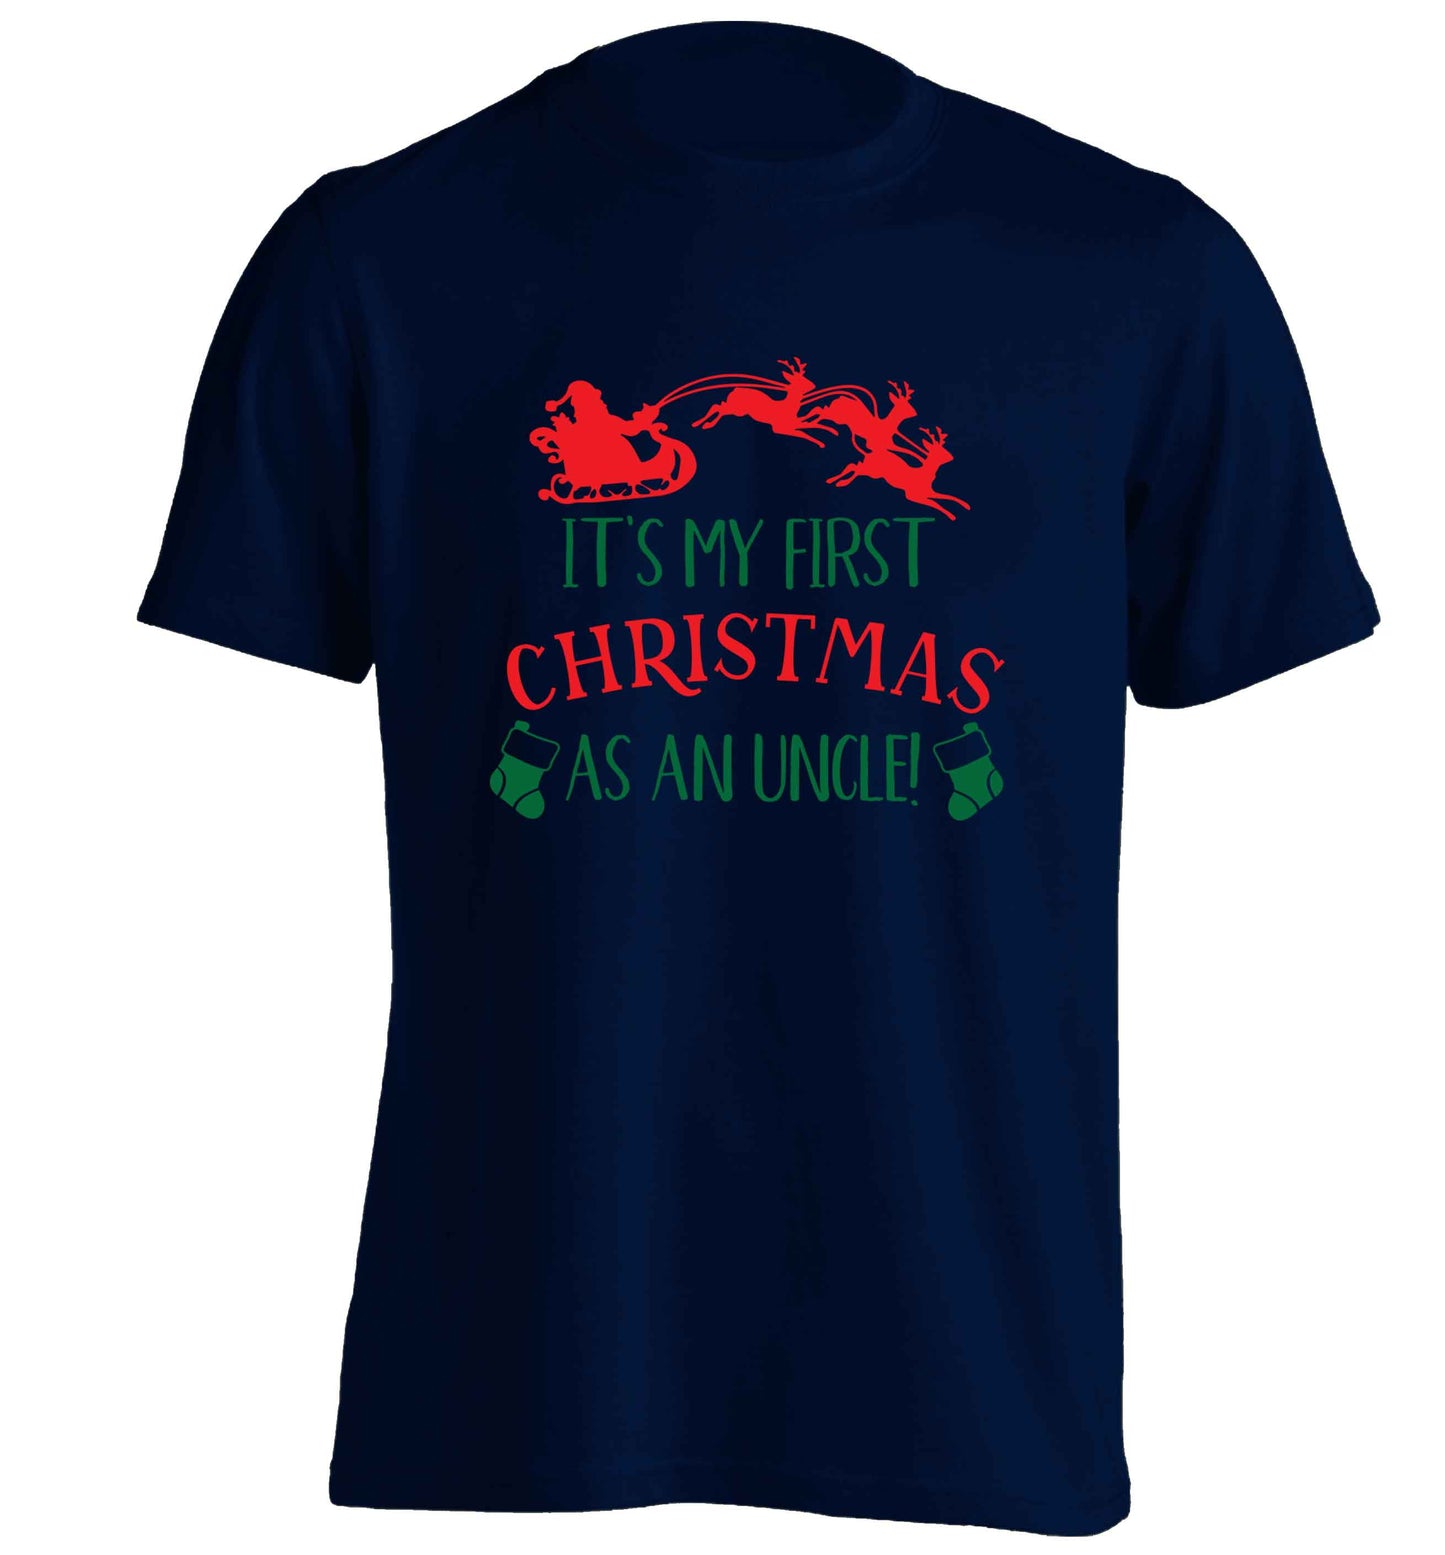 It's my first Christmas as an uncle! adults unisex navy Tshirt 2XL